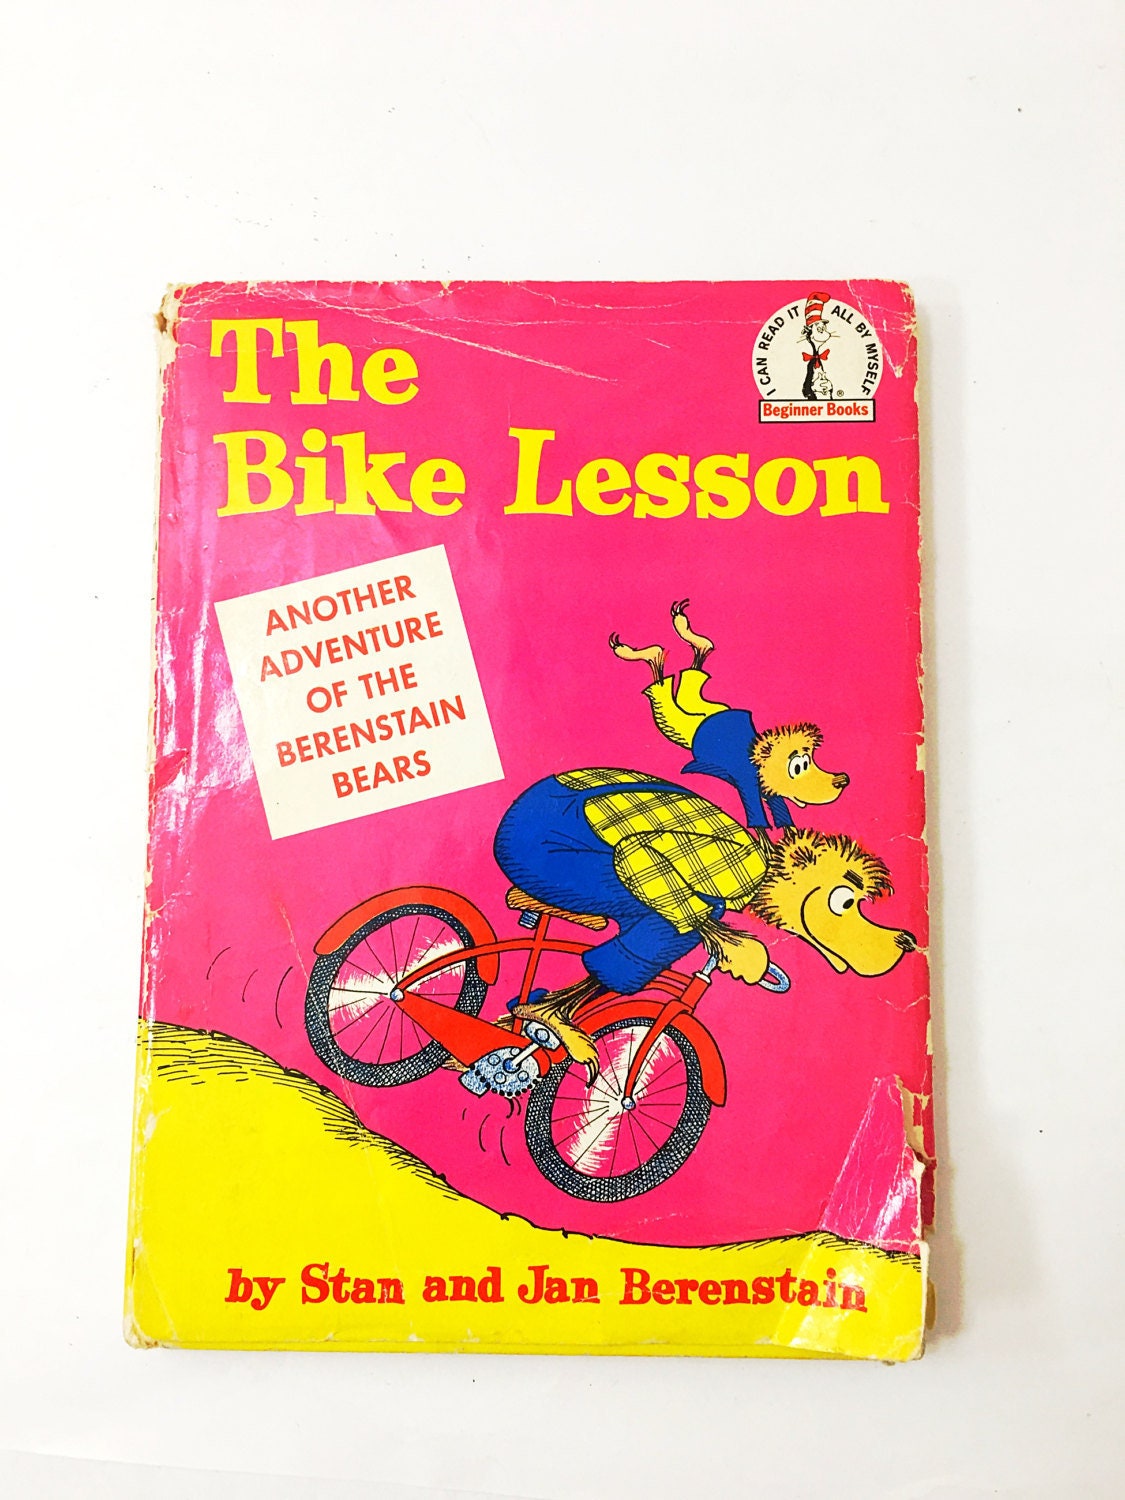 1964 Bike Lesson Berenstain Bears by Stan and Jan Berenstain FIRST EDITION Vintage book Pink home decor I can read it all by myself Beginner